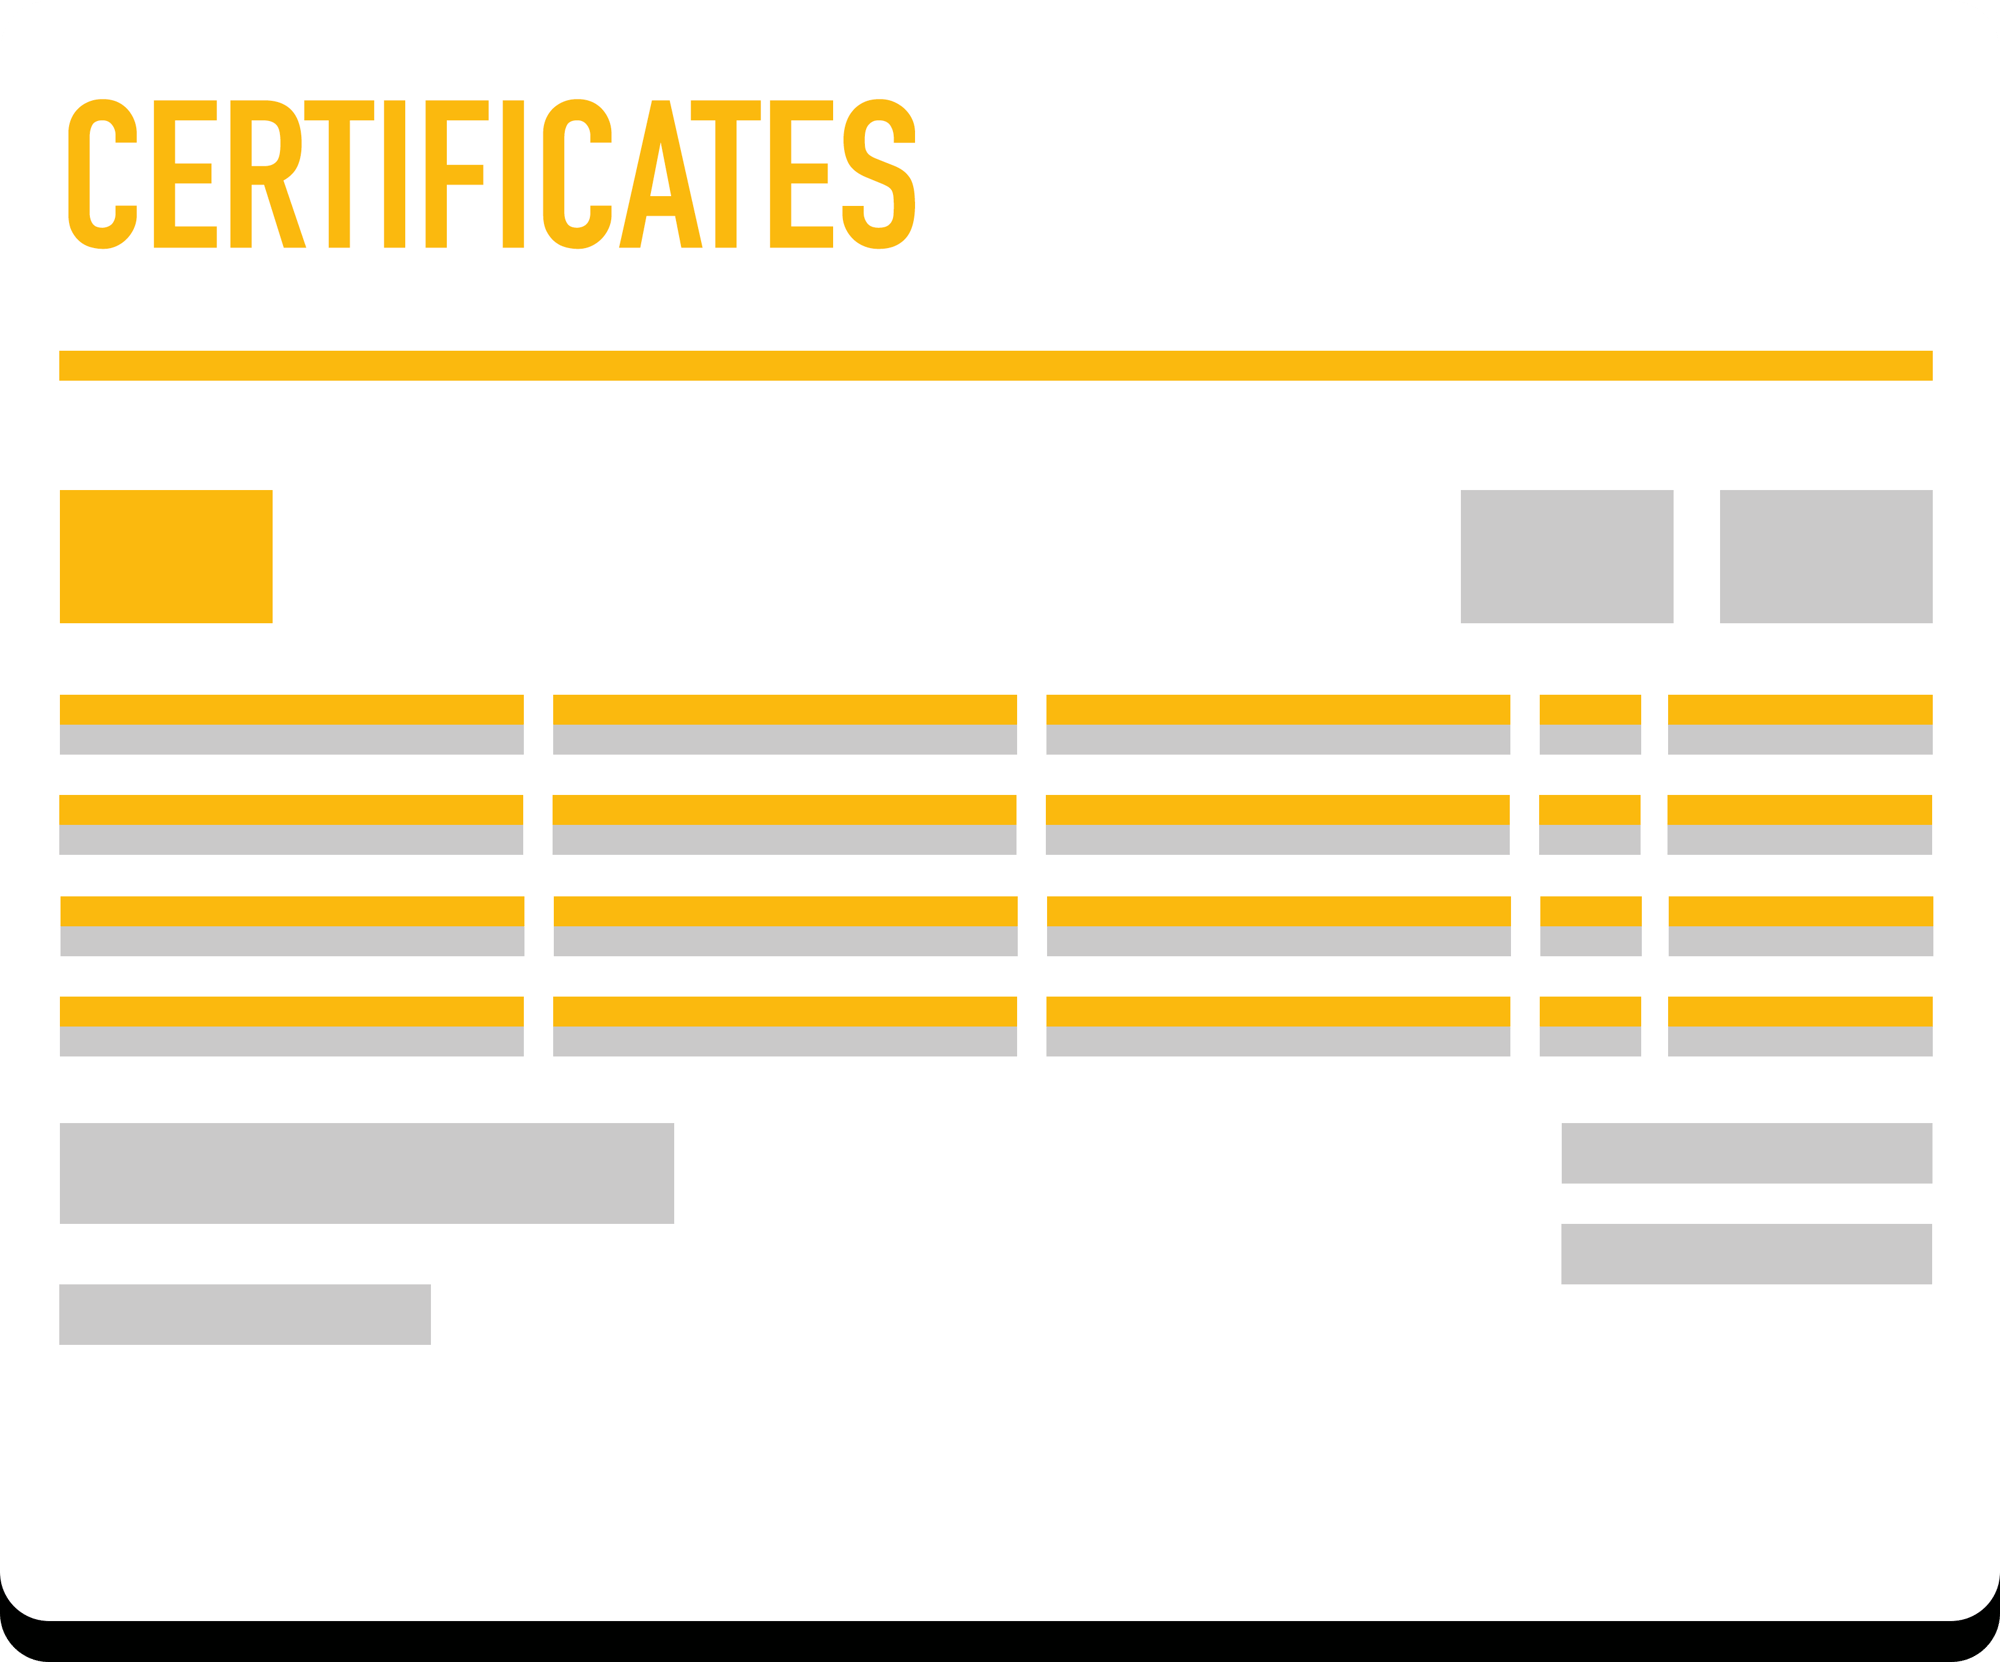 Certificates for Scrap and Demolition